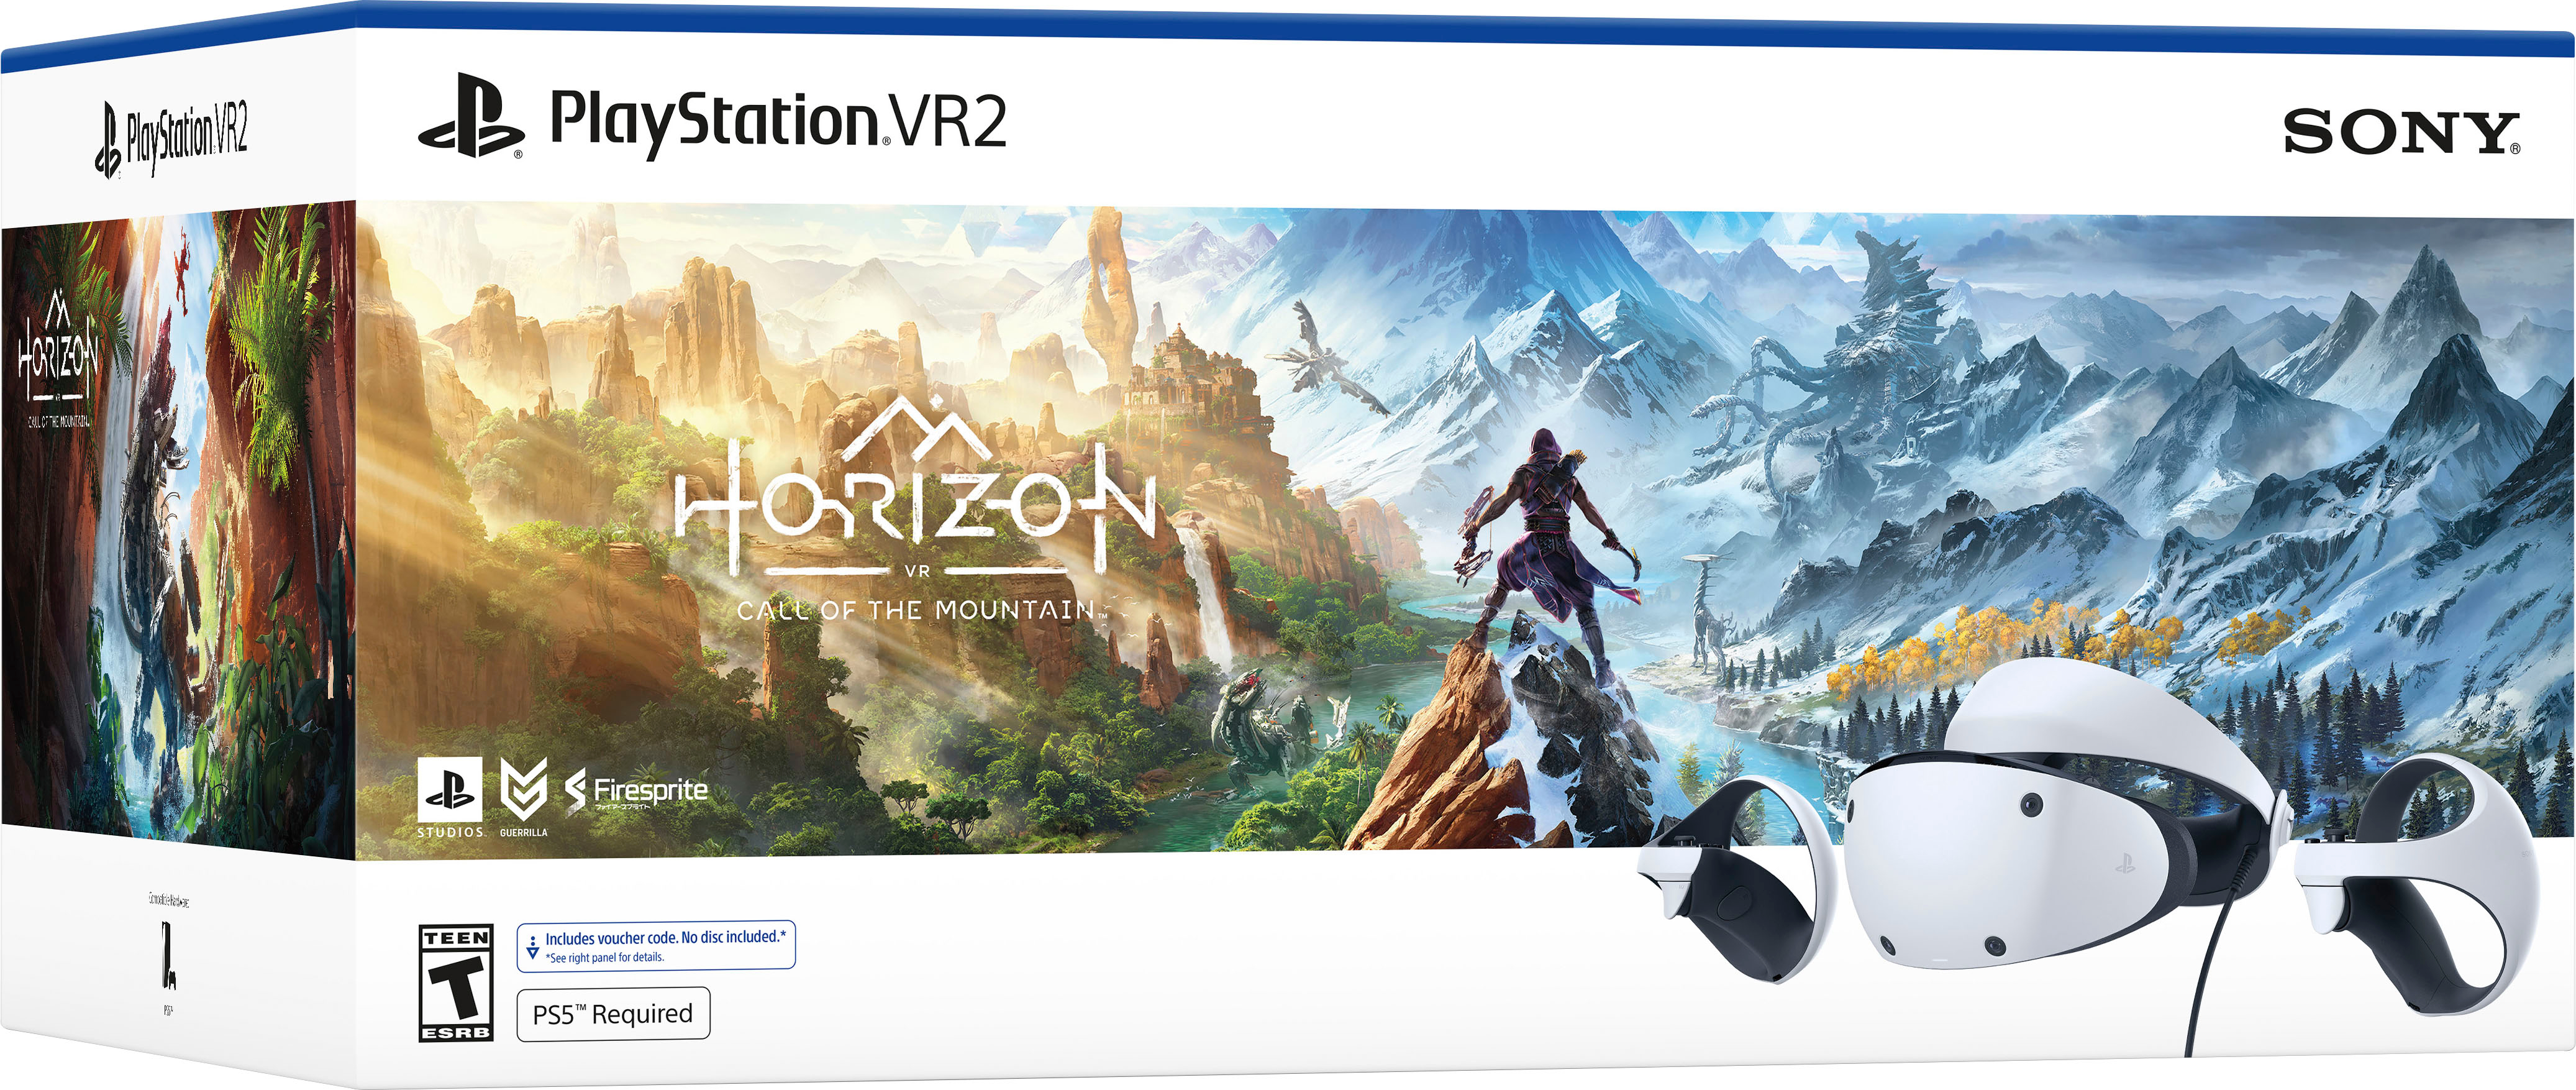 PlayStation VR2 Horizon Call of the Mountain bundle 1000035074 